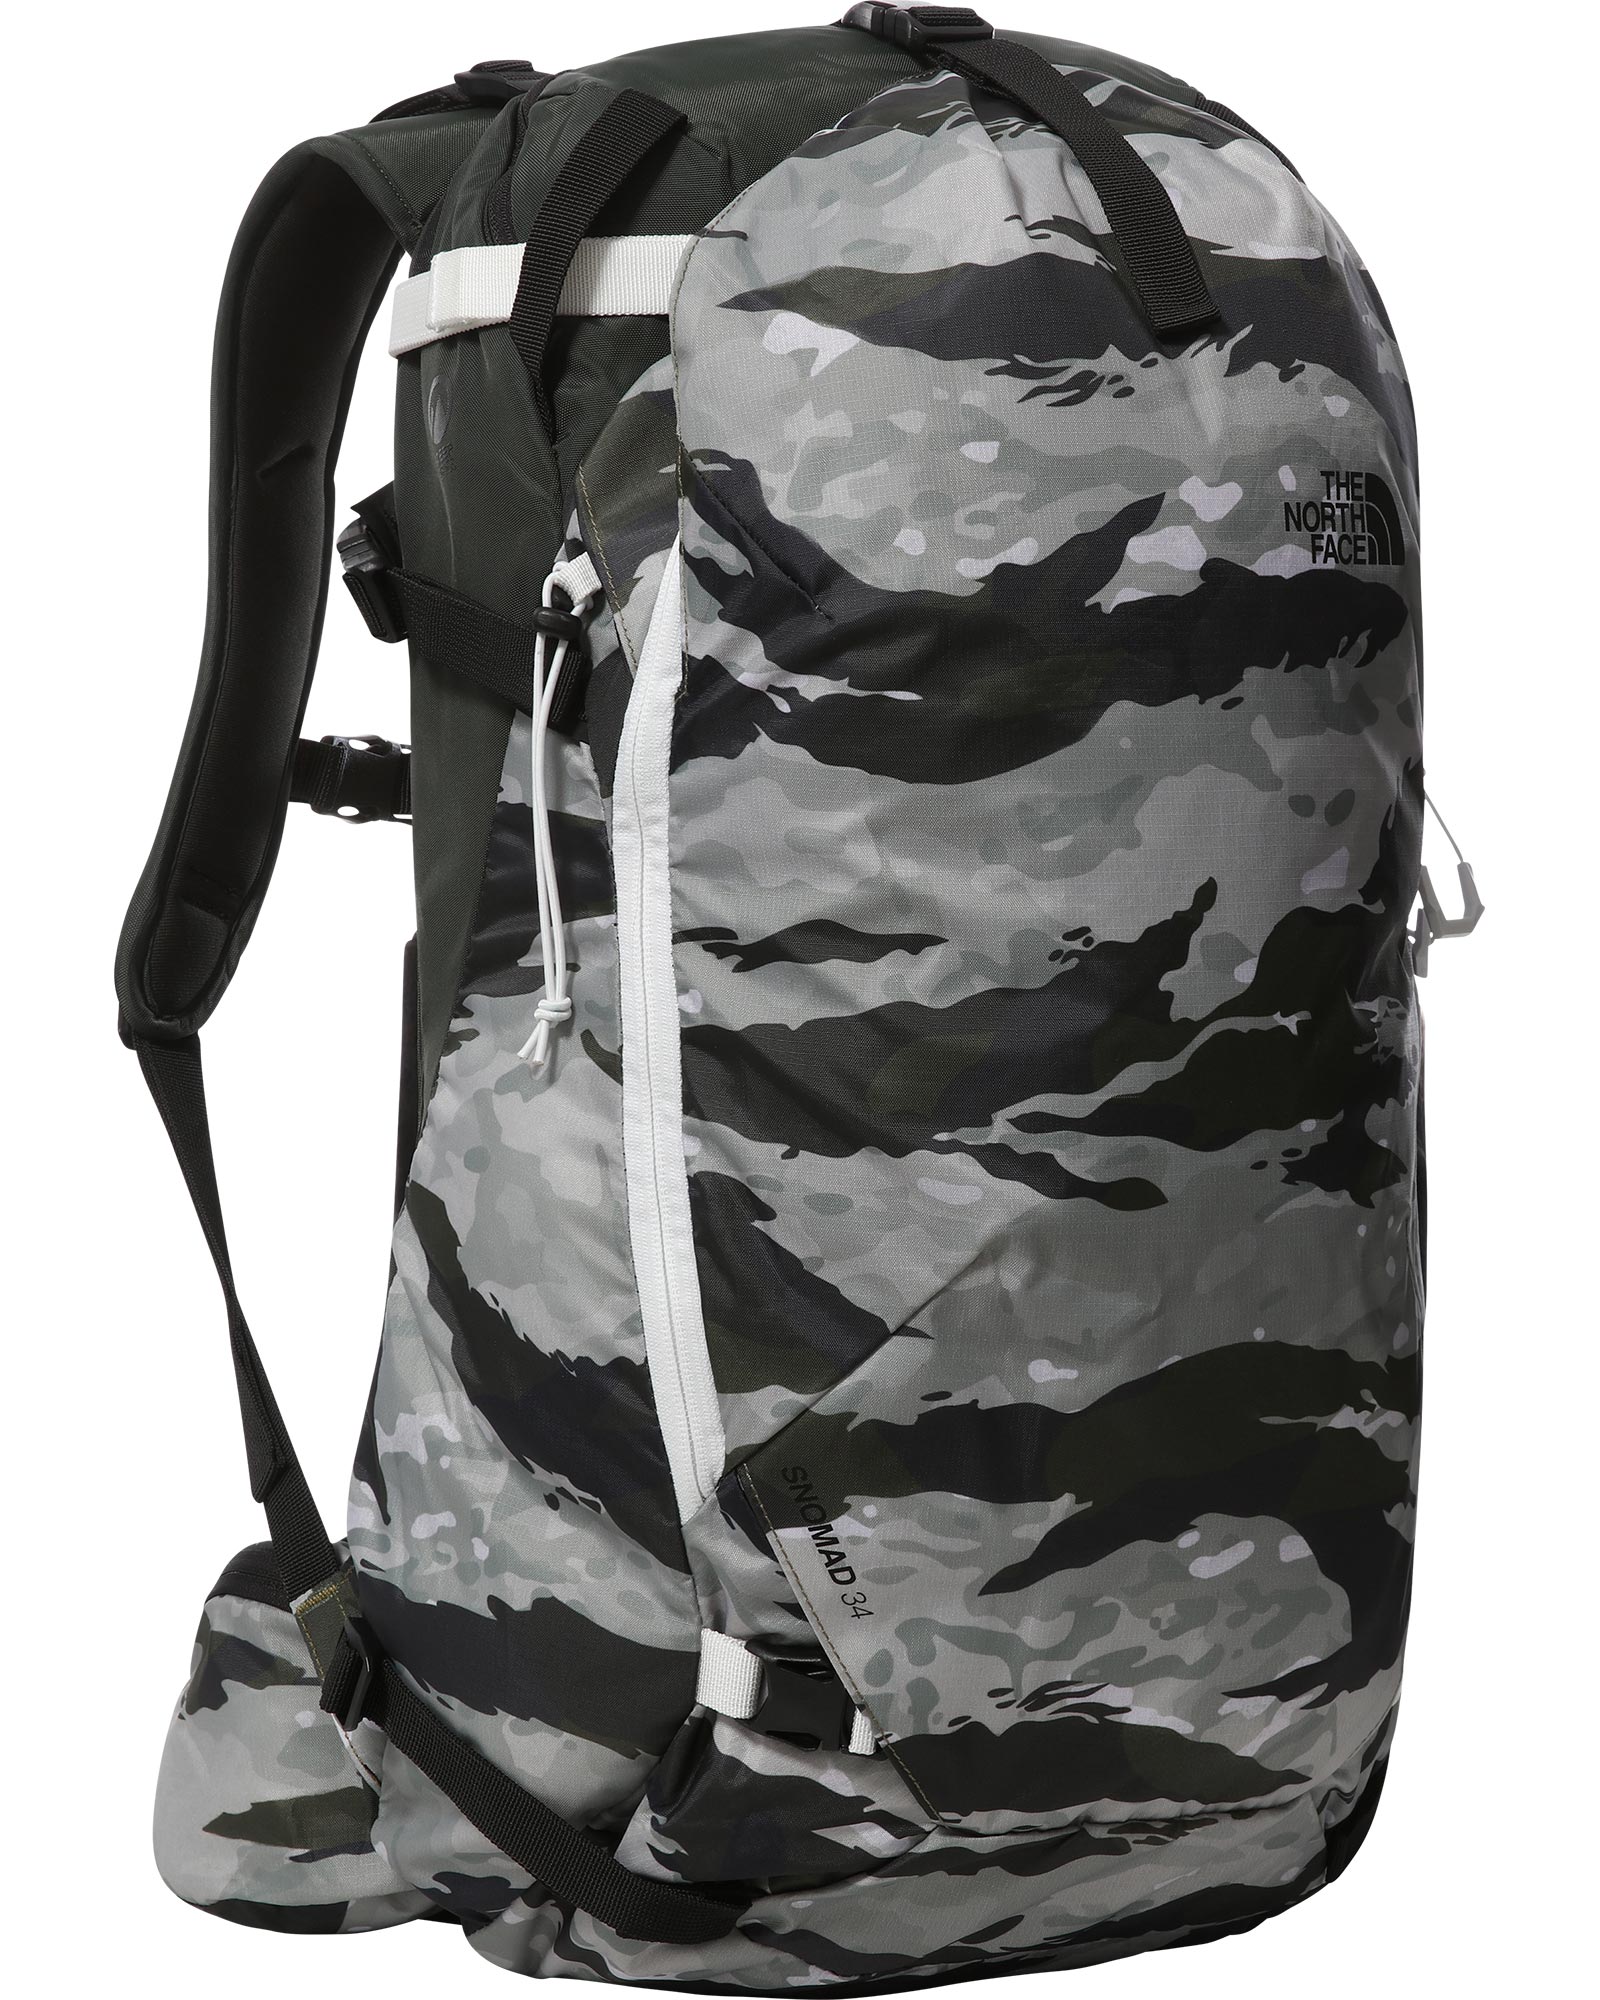 The North Face Snomad 34 Backpack - Rock Green Multi Camo Print S/M